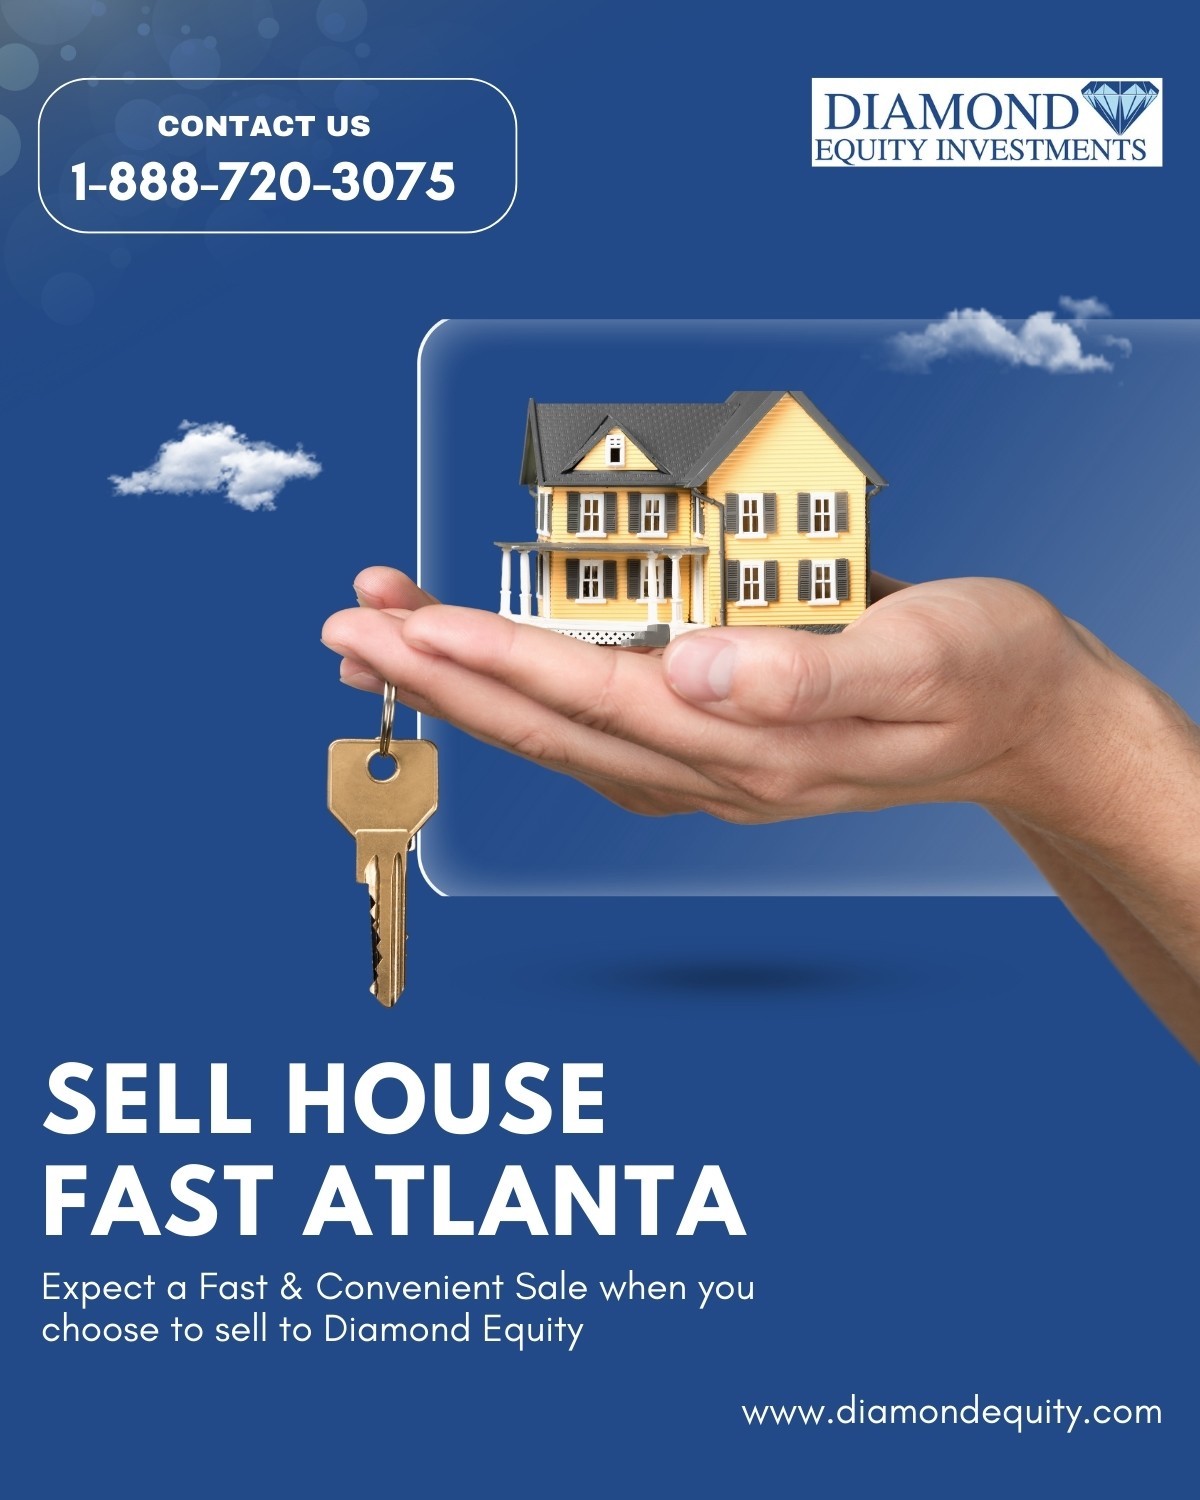 How to Sell a House Fast in Atlanta | Diamond Equity Investments